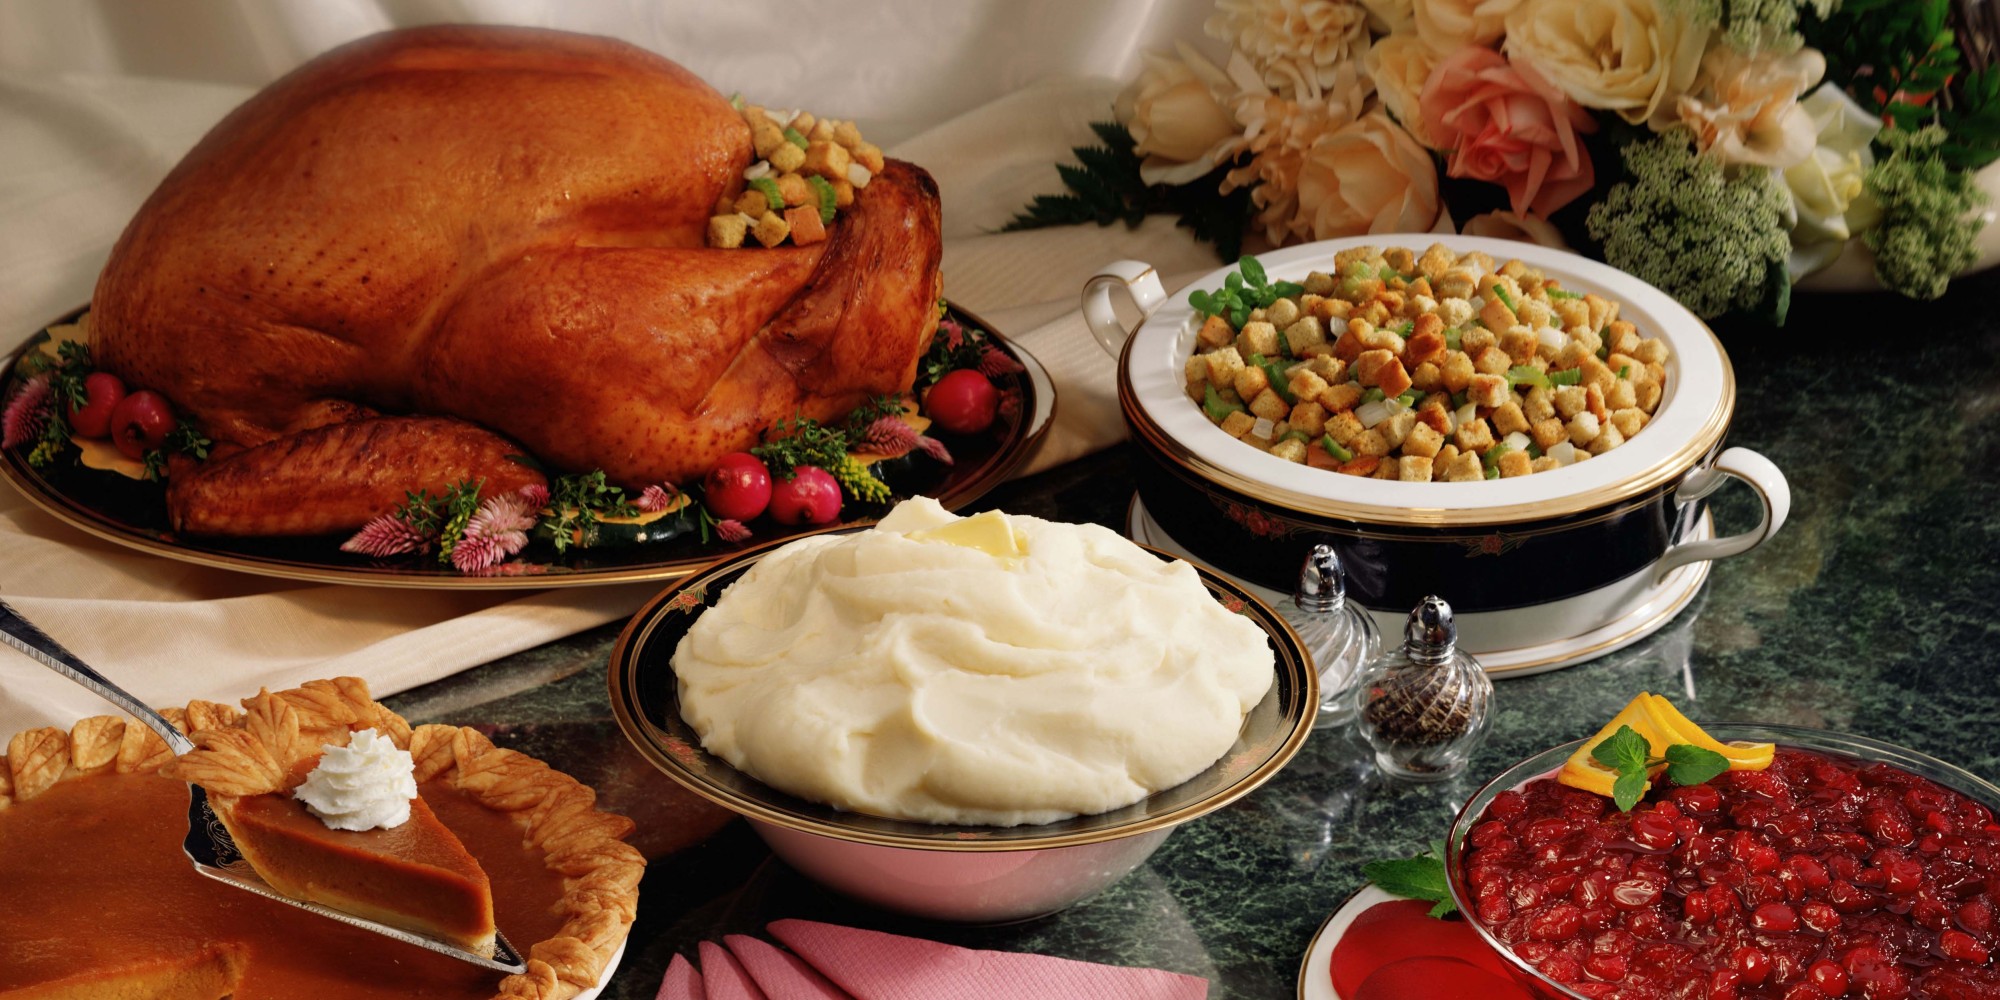 7 Holiday Foods You Definitely Need To Avoid | HuffPost